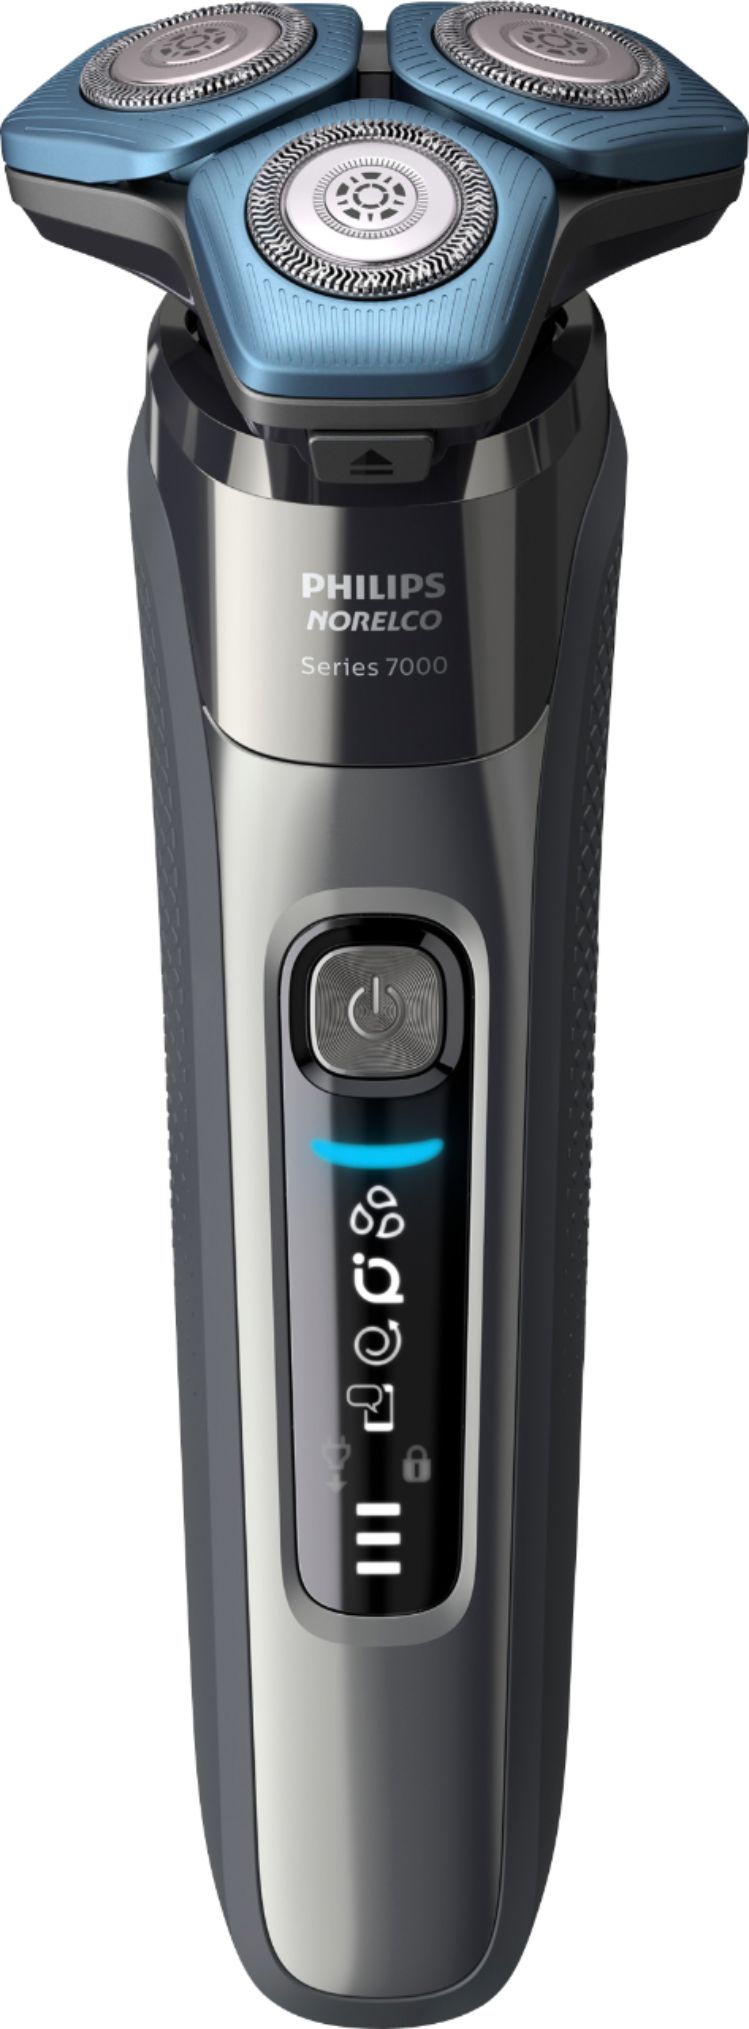 Philips Series 7000 Rechargeable Shaver S7710/15 ,NEW SEALED